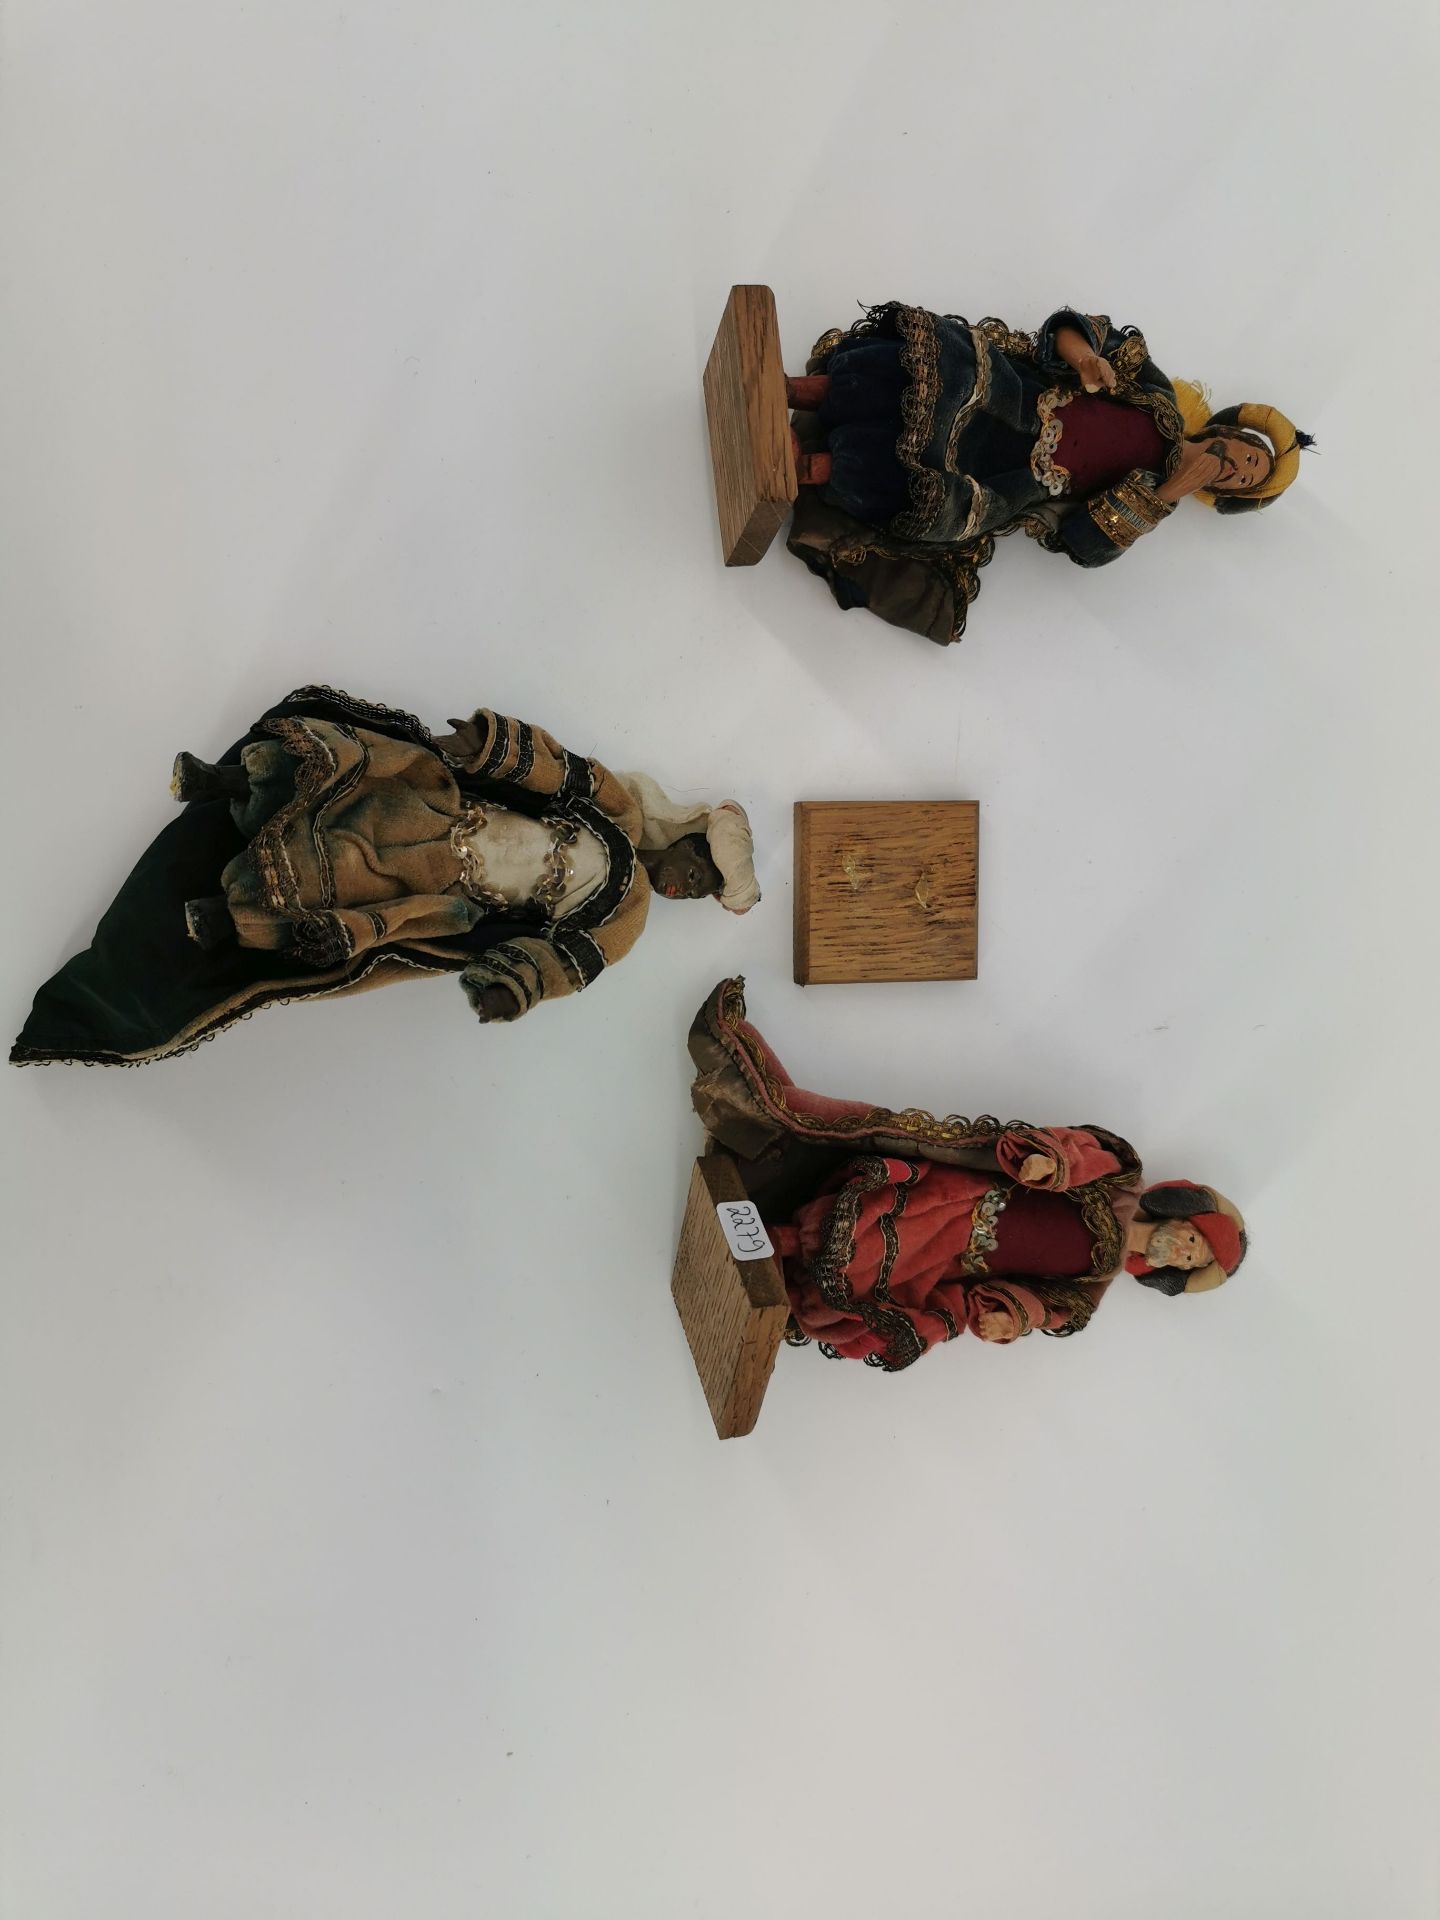 FIGURES OF THE HOLY THREE KINGS IN THE STYLE OF NEAPOLITAN NATIVITY FIGURES - Image 4 of 4